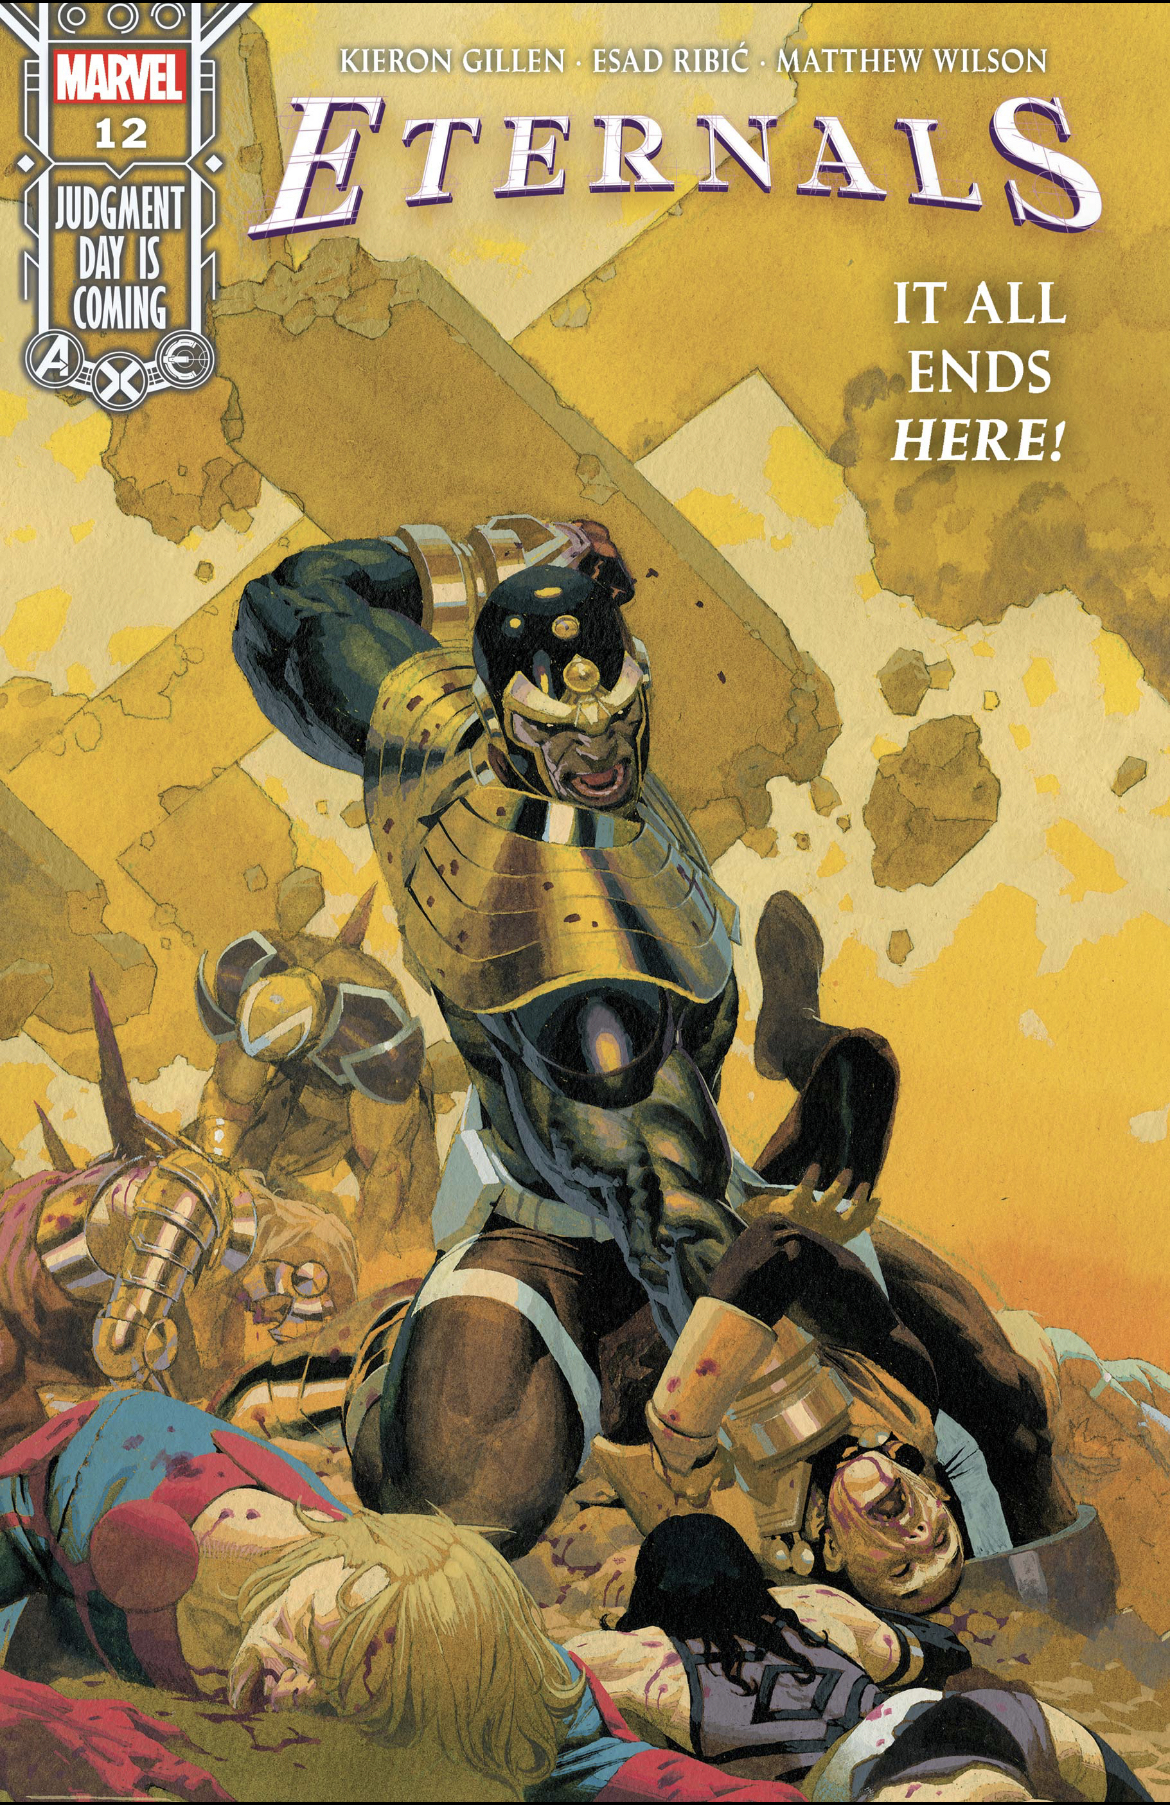 Cover of comic book "Eternals" issue 12 shows Thanos punching down at defeated hero